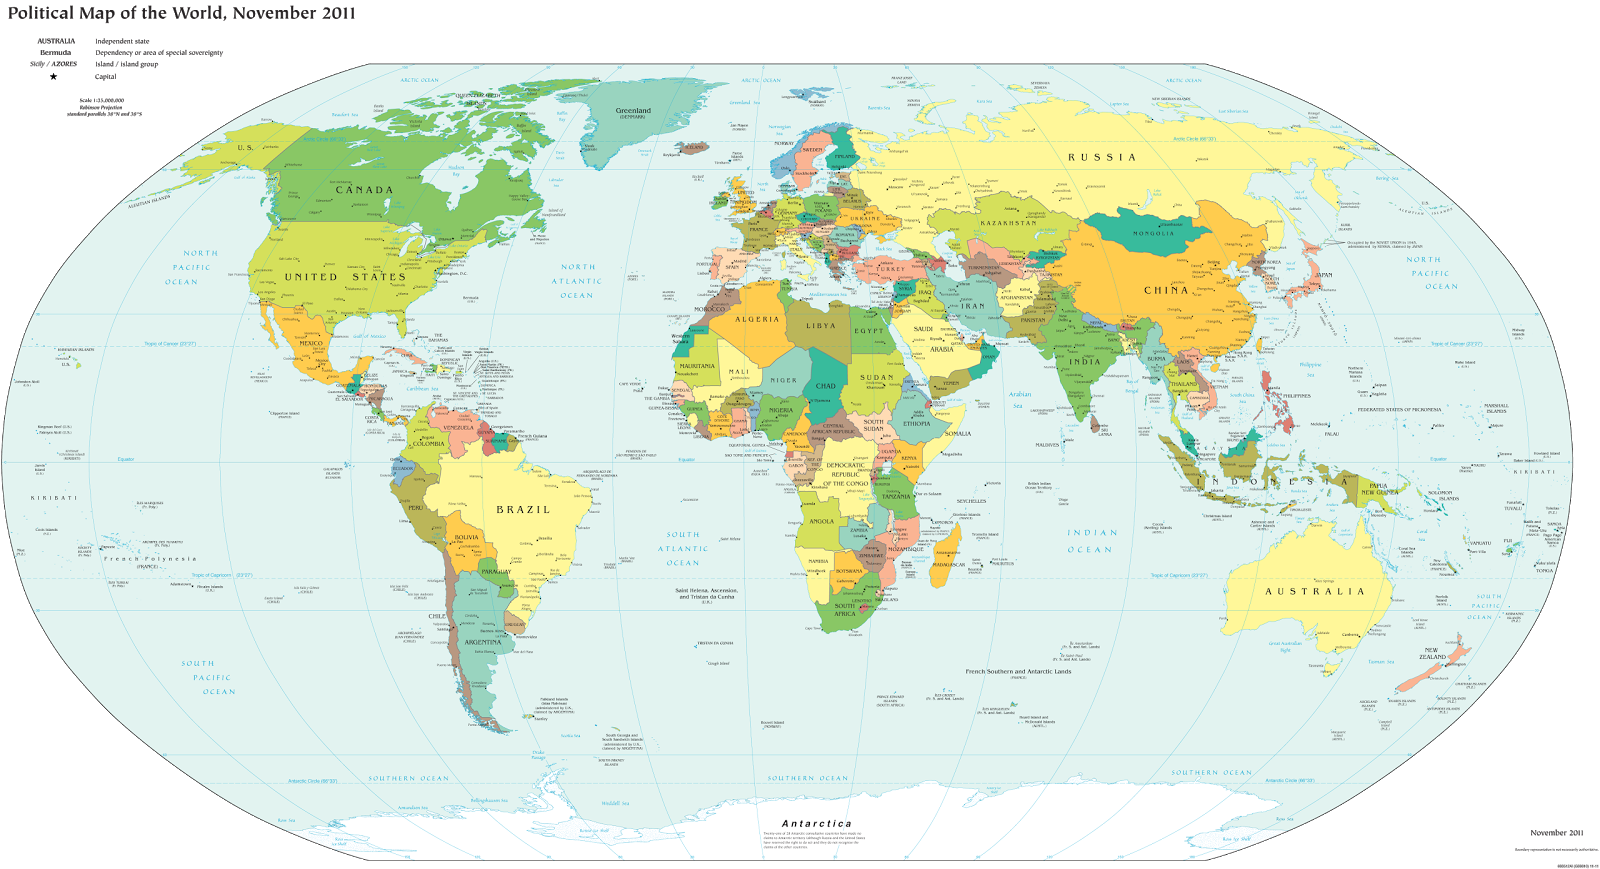 Map of the world's countries according to the U.S. Central Intelligence Agency